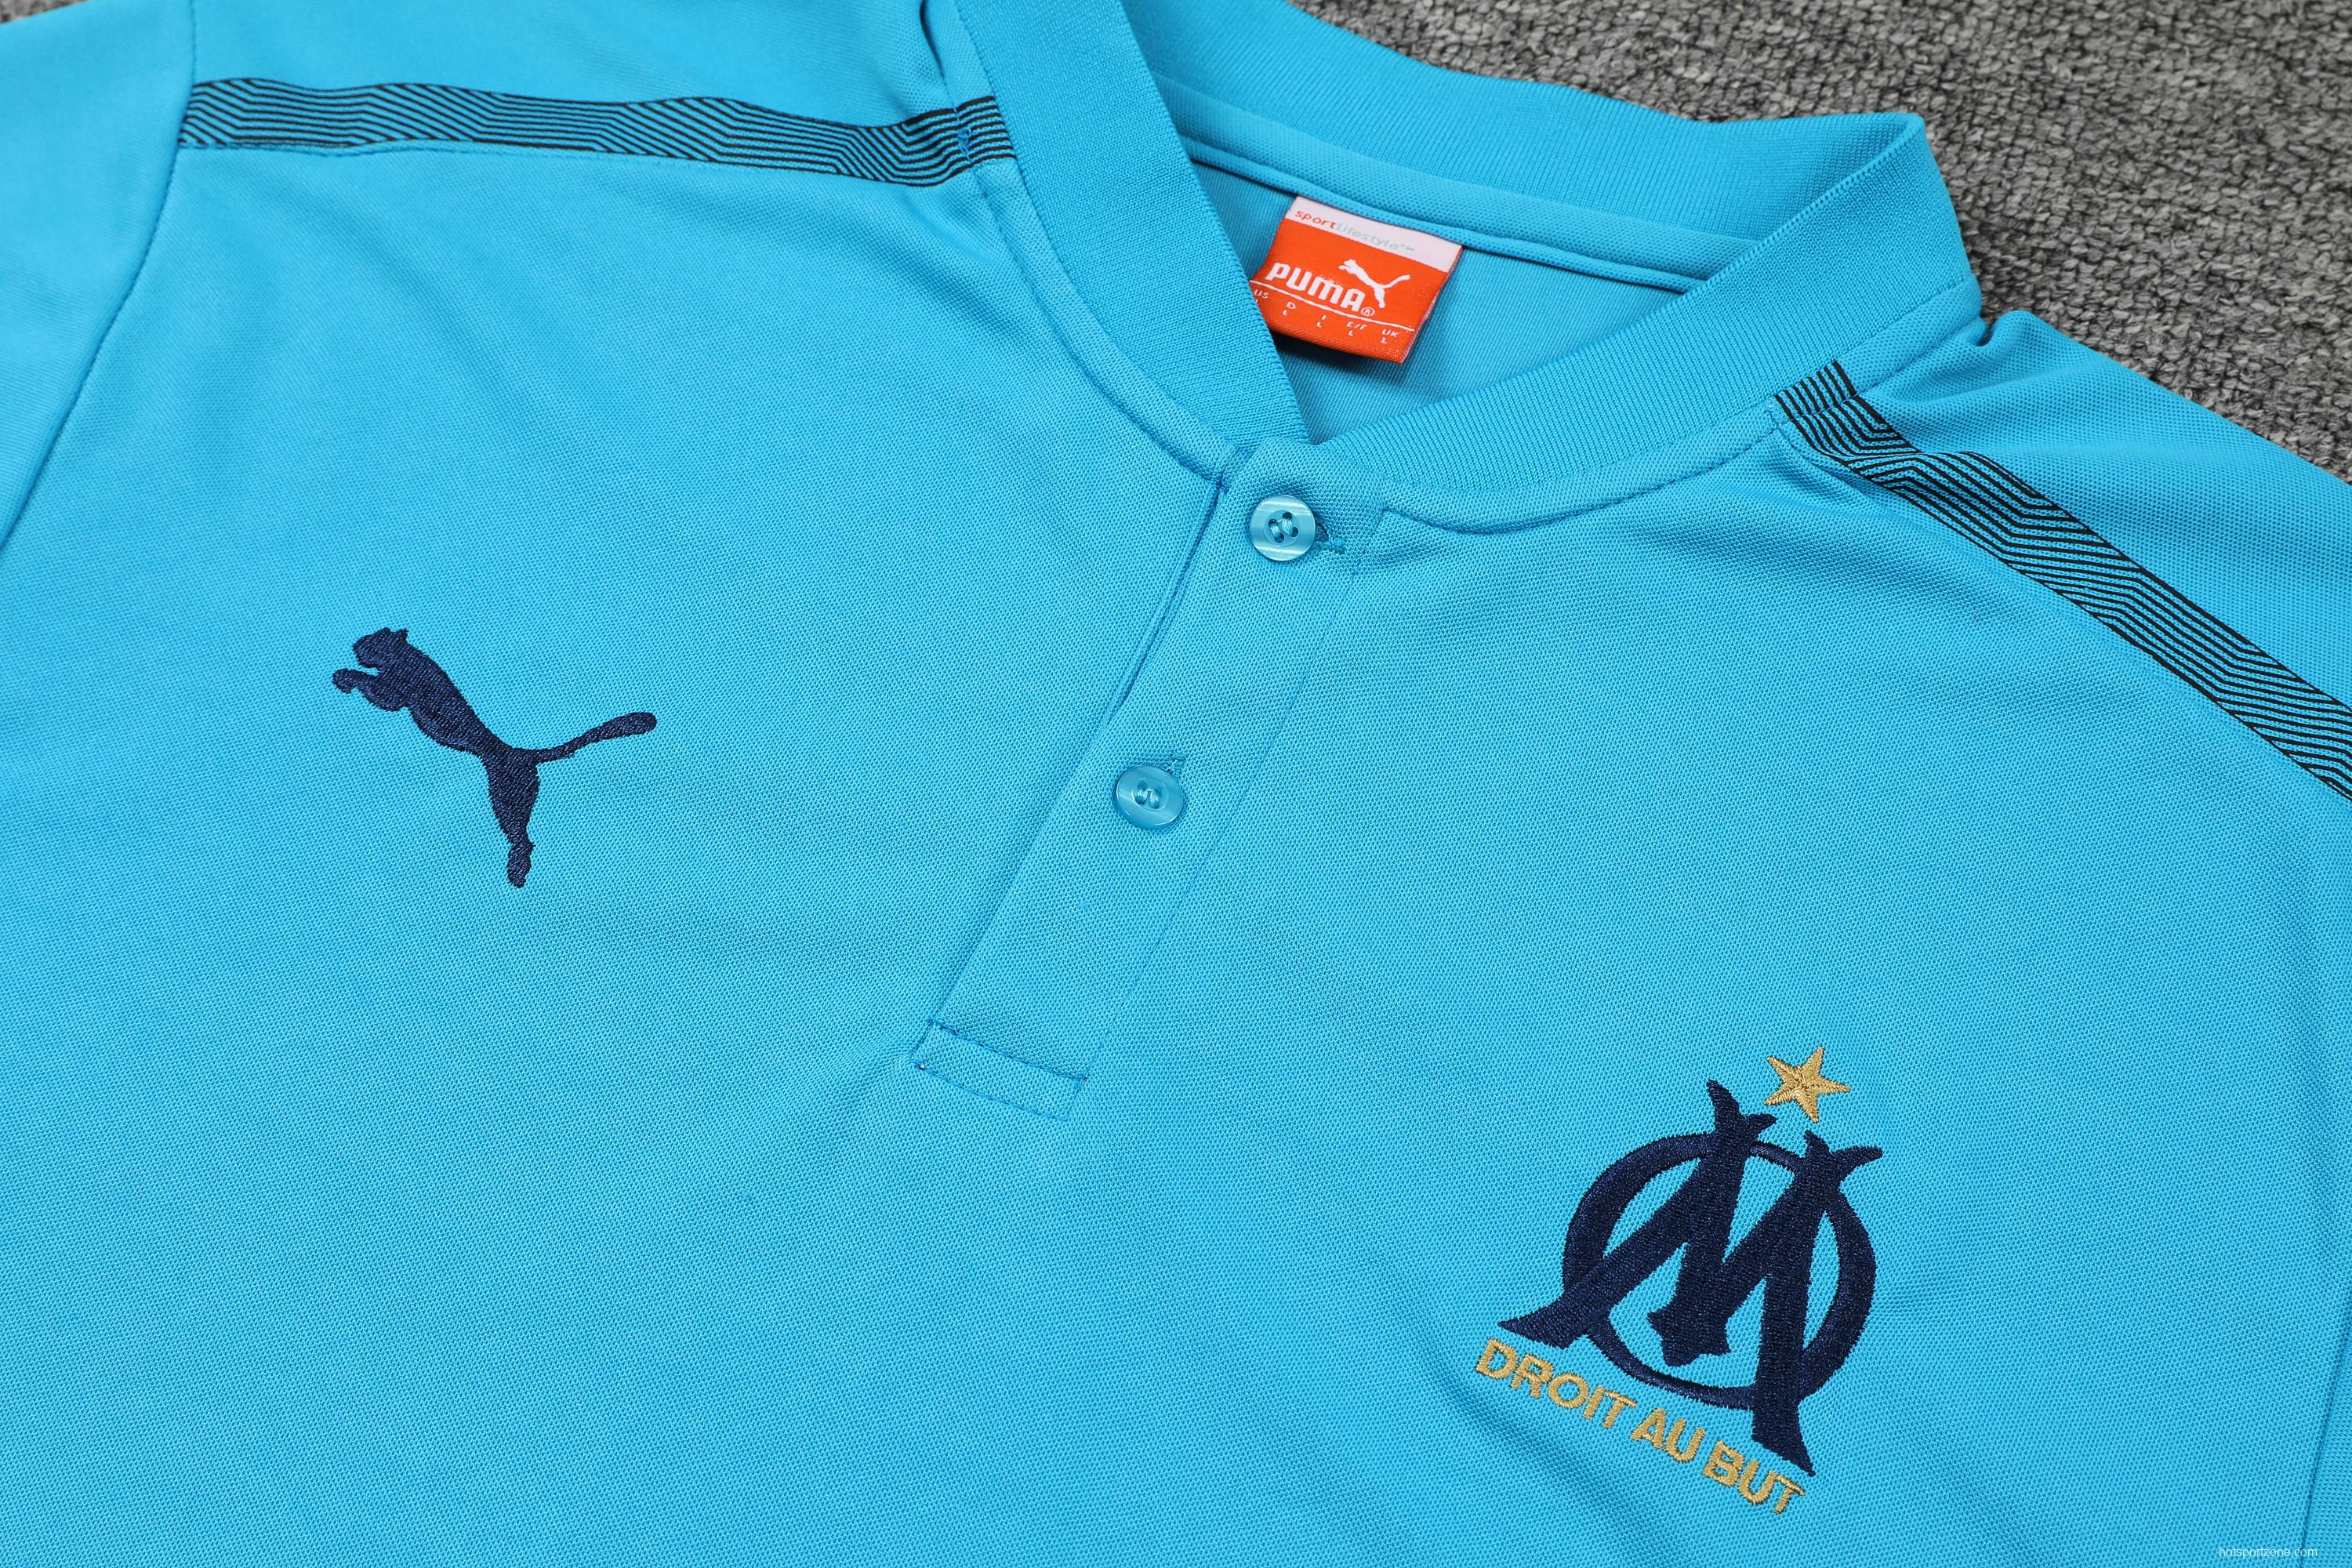 Olympique de Marseille POLO kit Blue (not supported to be sold separately)